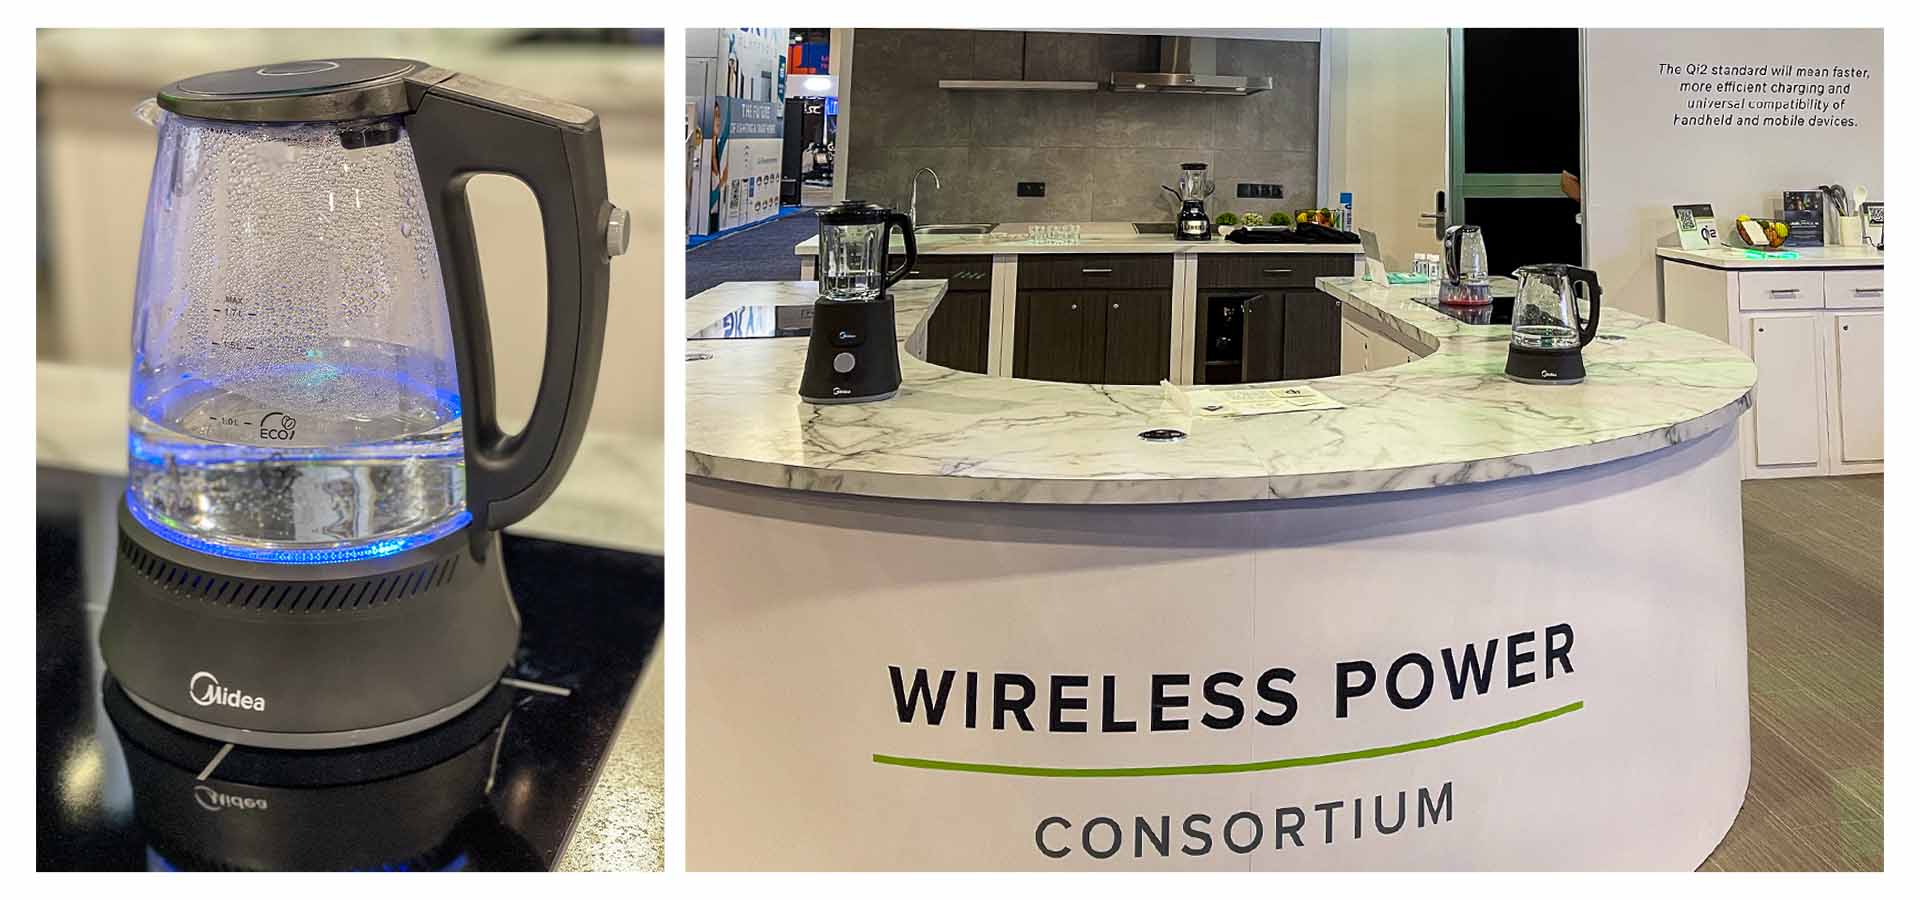 https://www.midea.com/content/dam/midea-aem/us/homestead/midea-showcases-innovation-and-connection--with-the-wireless-power-consortium-at-ces-2023/Midea_Wireless-Consortium-Banner.jpg